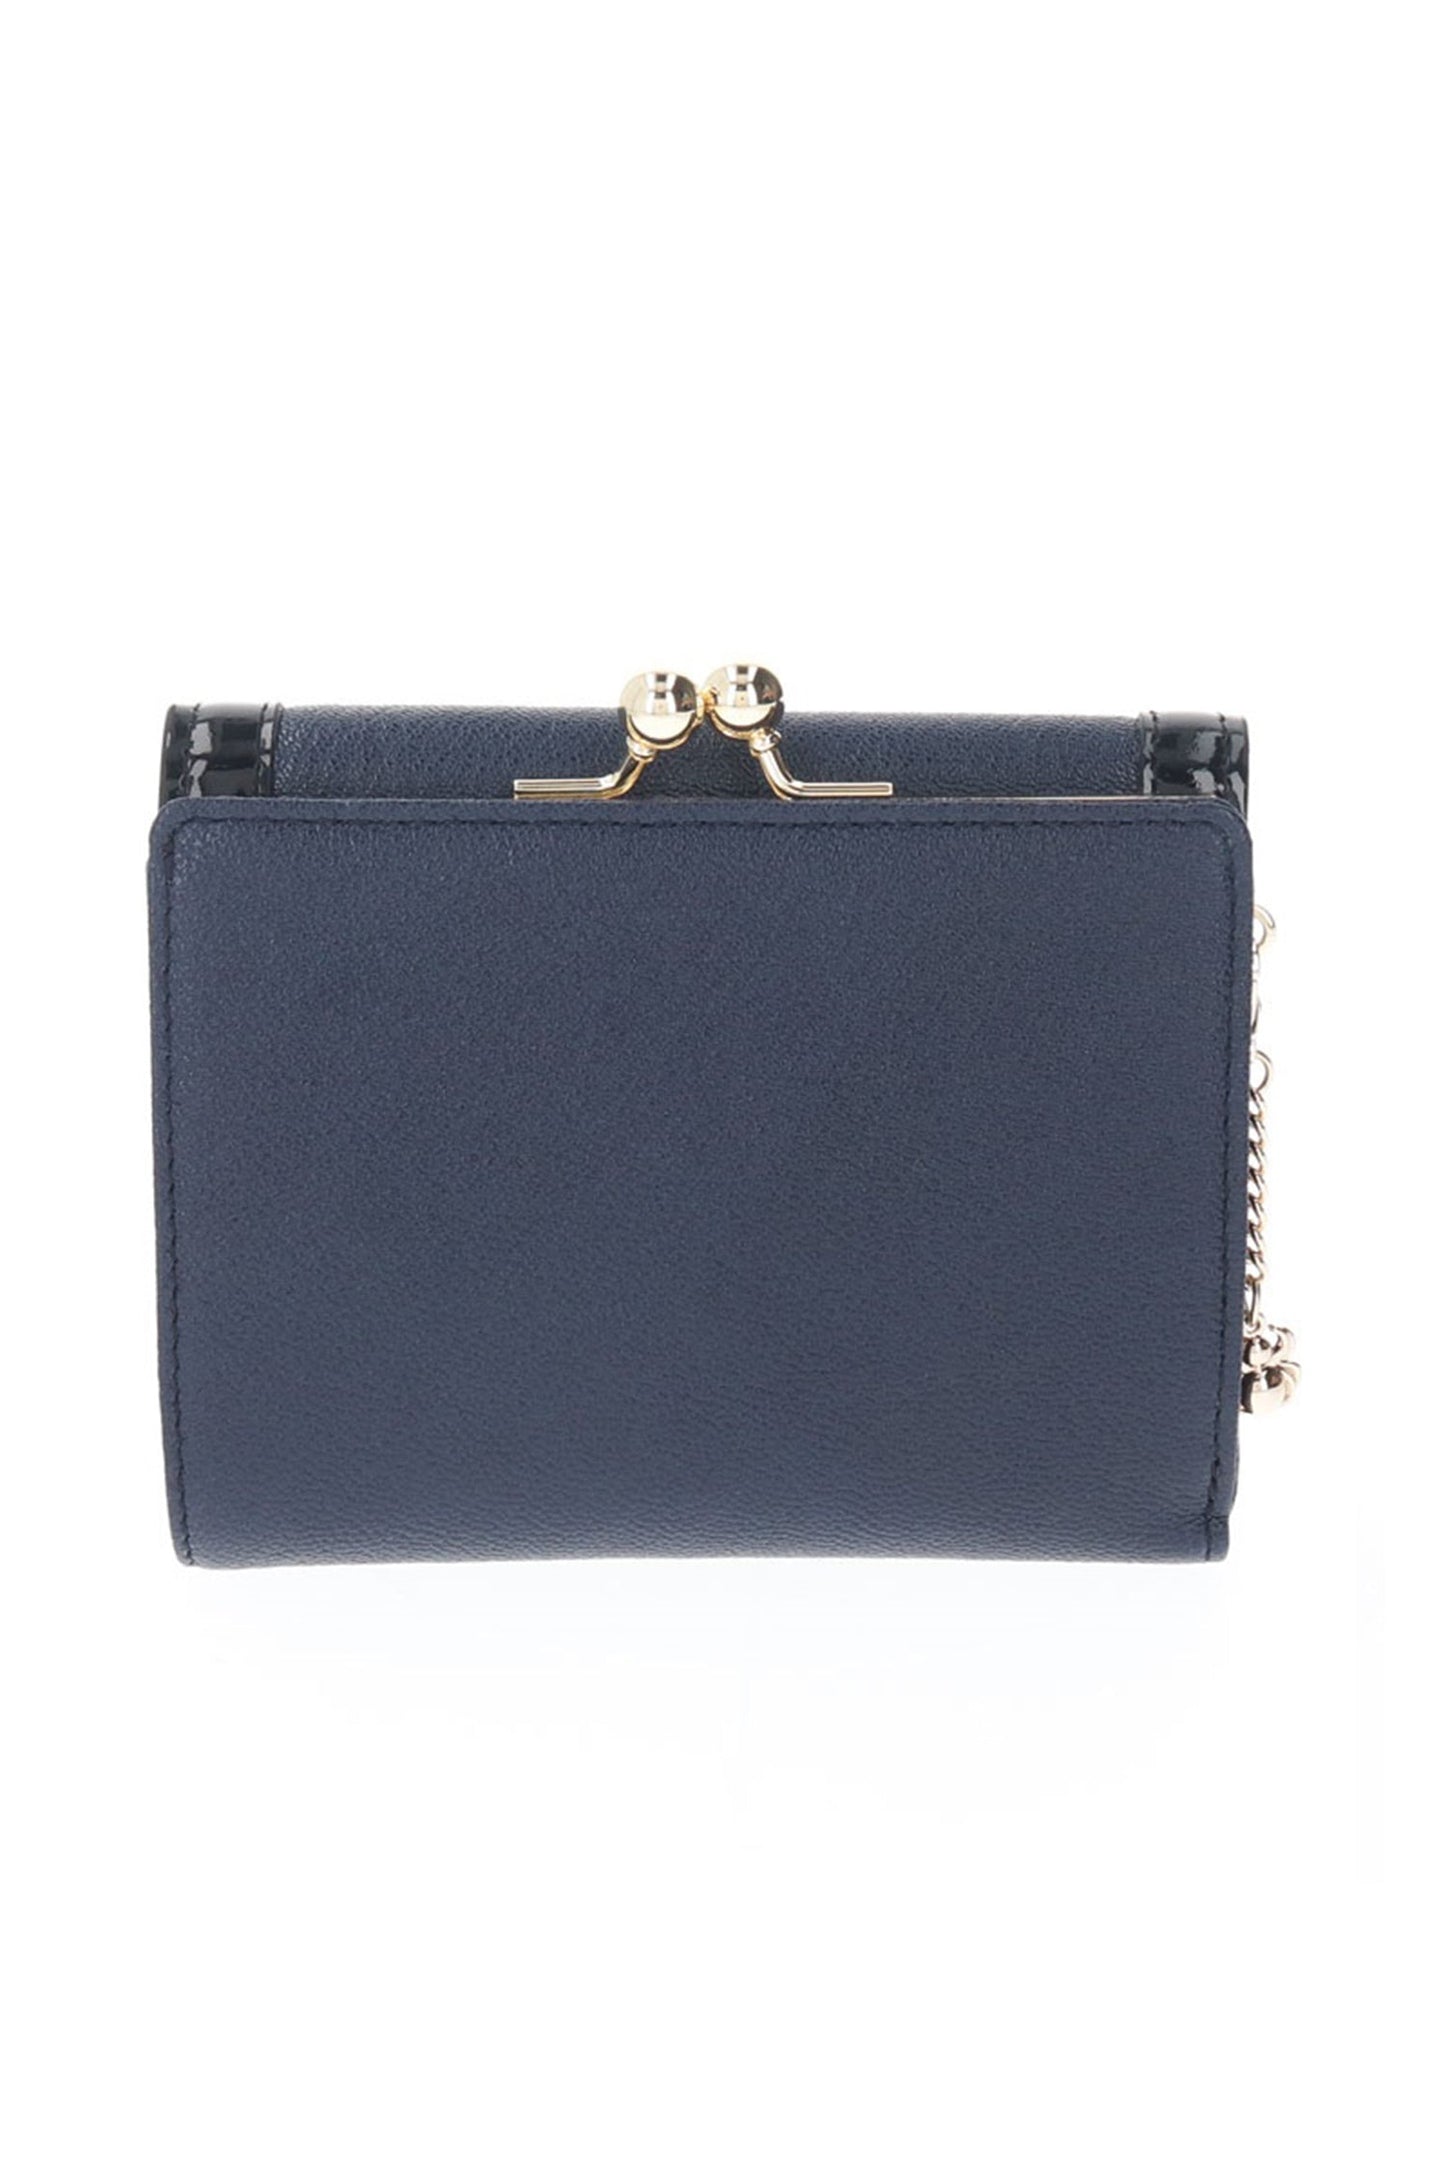 Poison golden Clasp on top Bi-fold Wallet Navy reveals, golden chain on the side